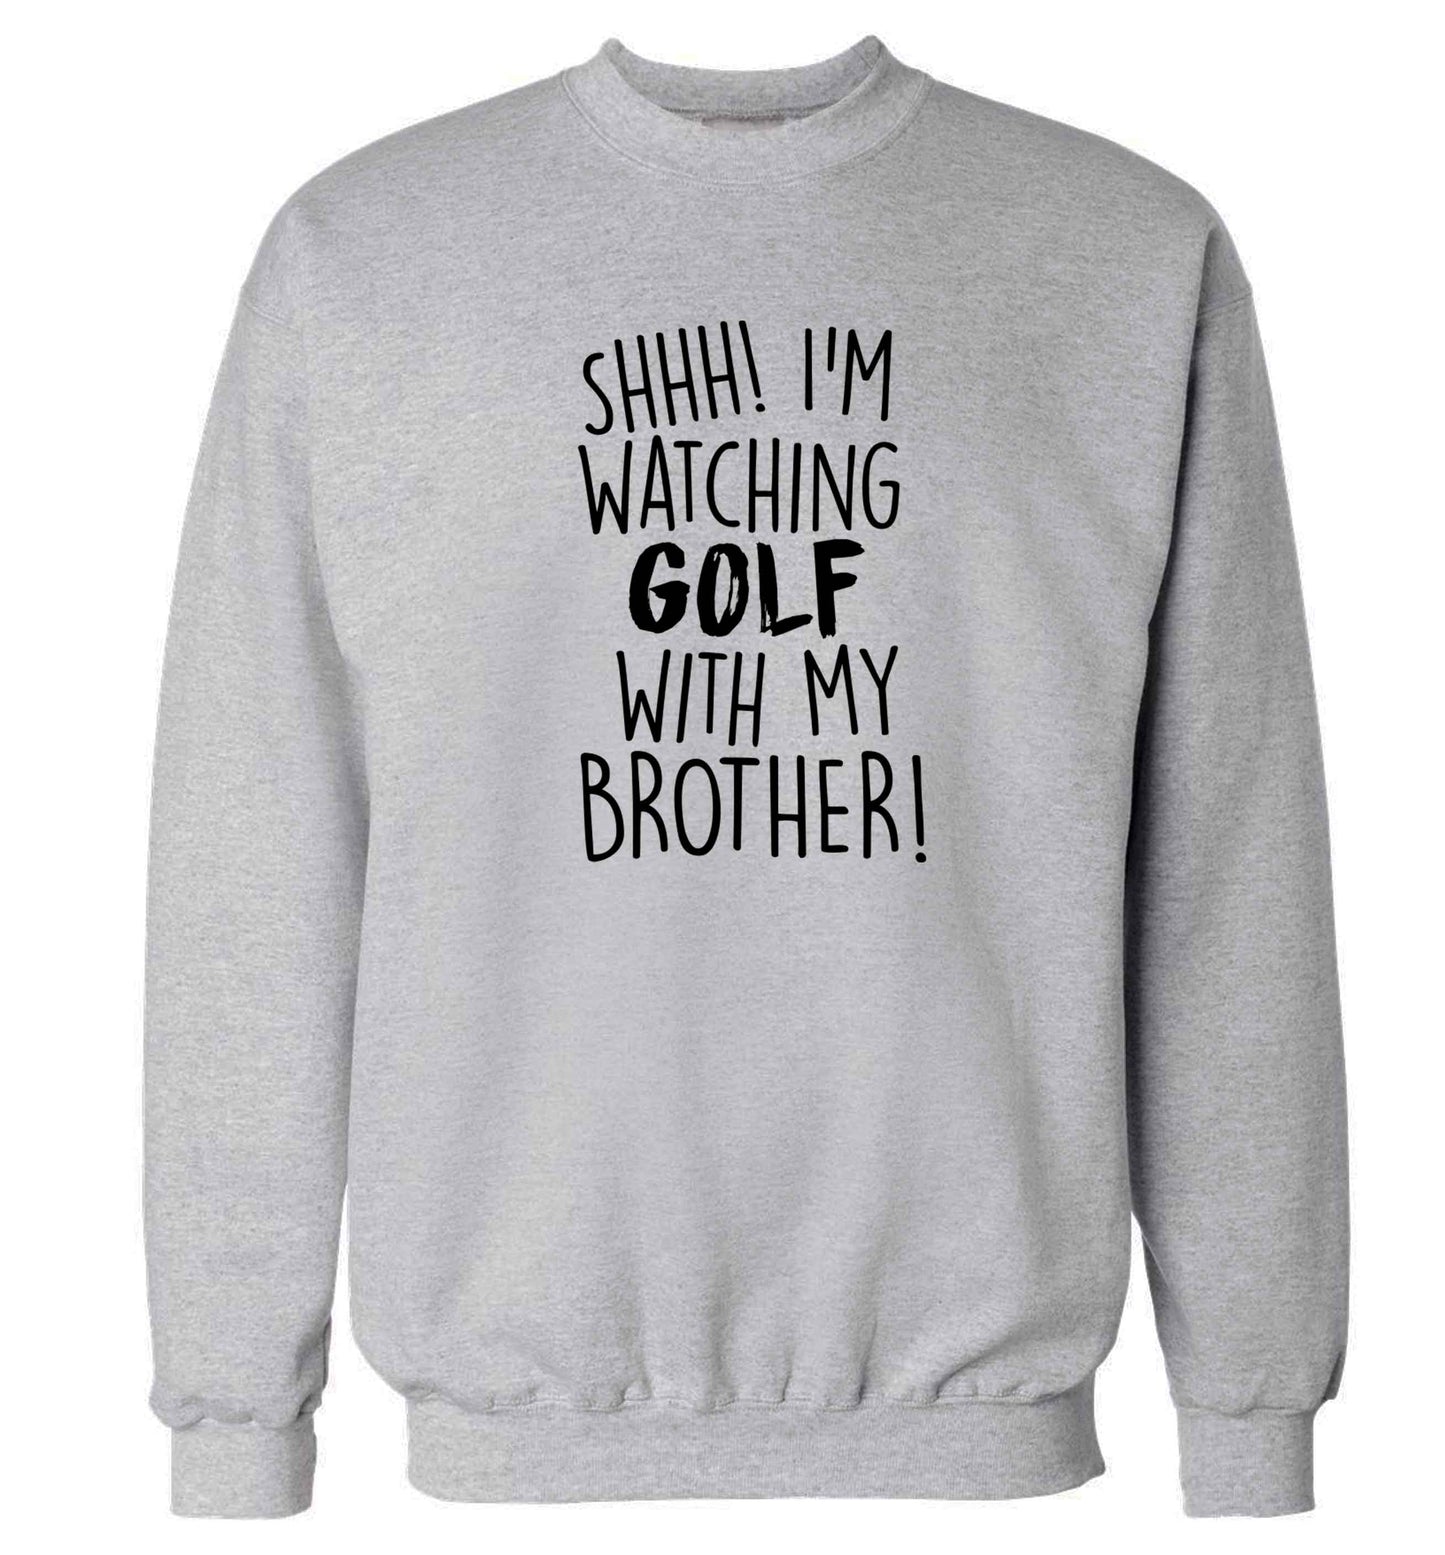 Shh I'm watching golf with my brother Adult's unisex grey Sweater 2XL